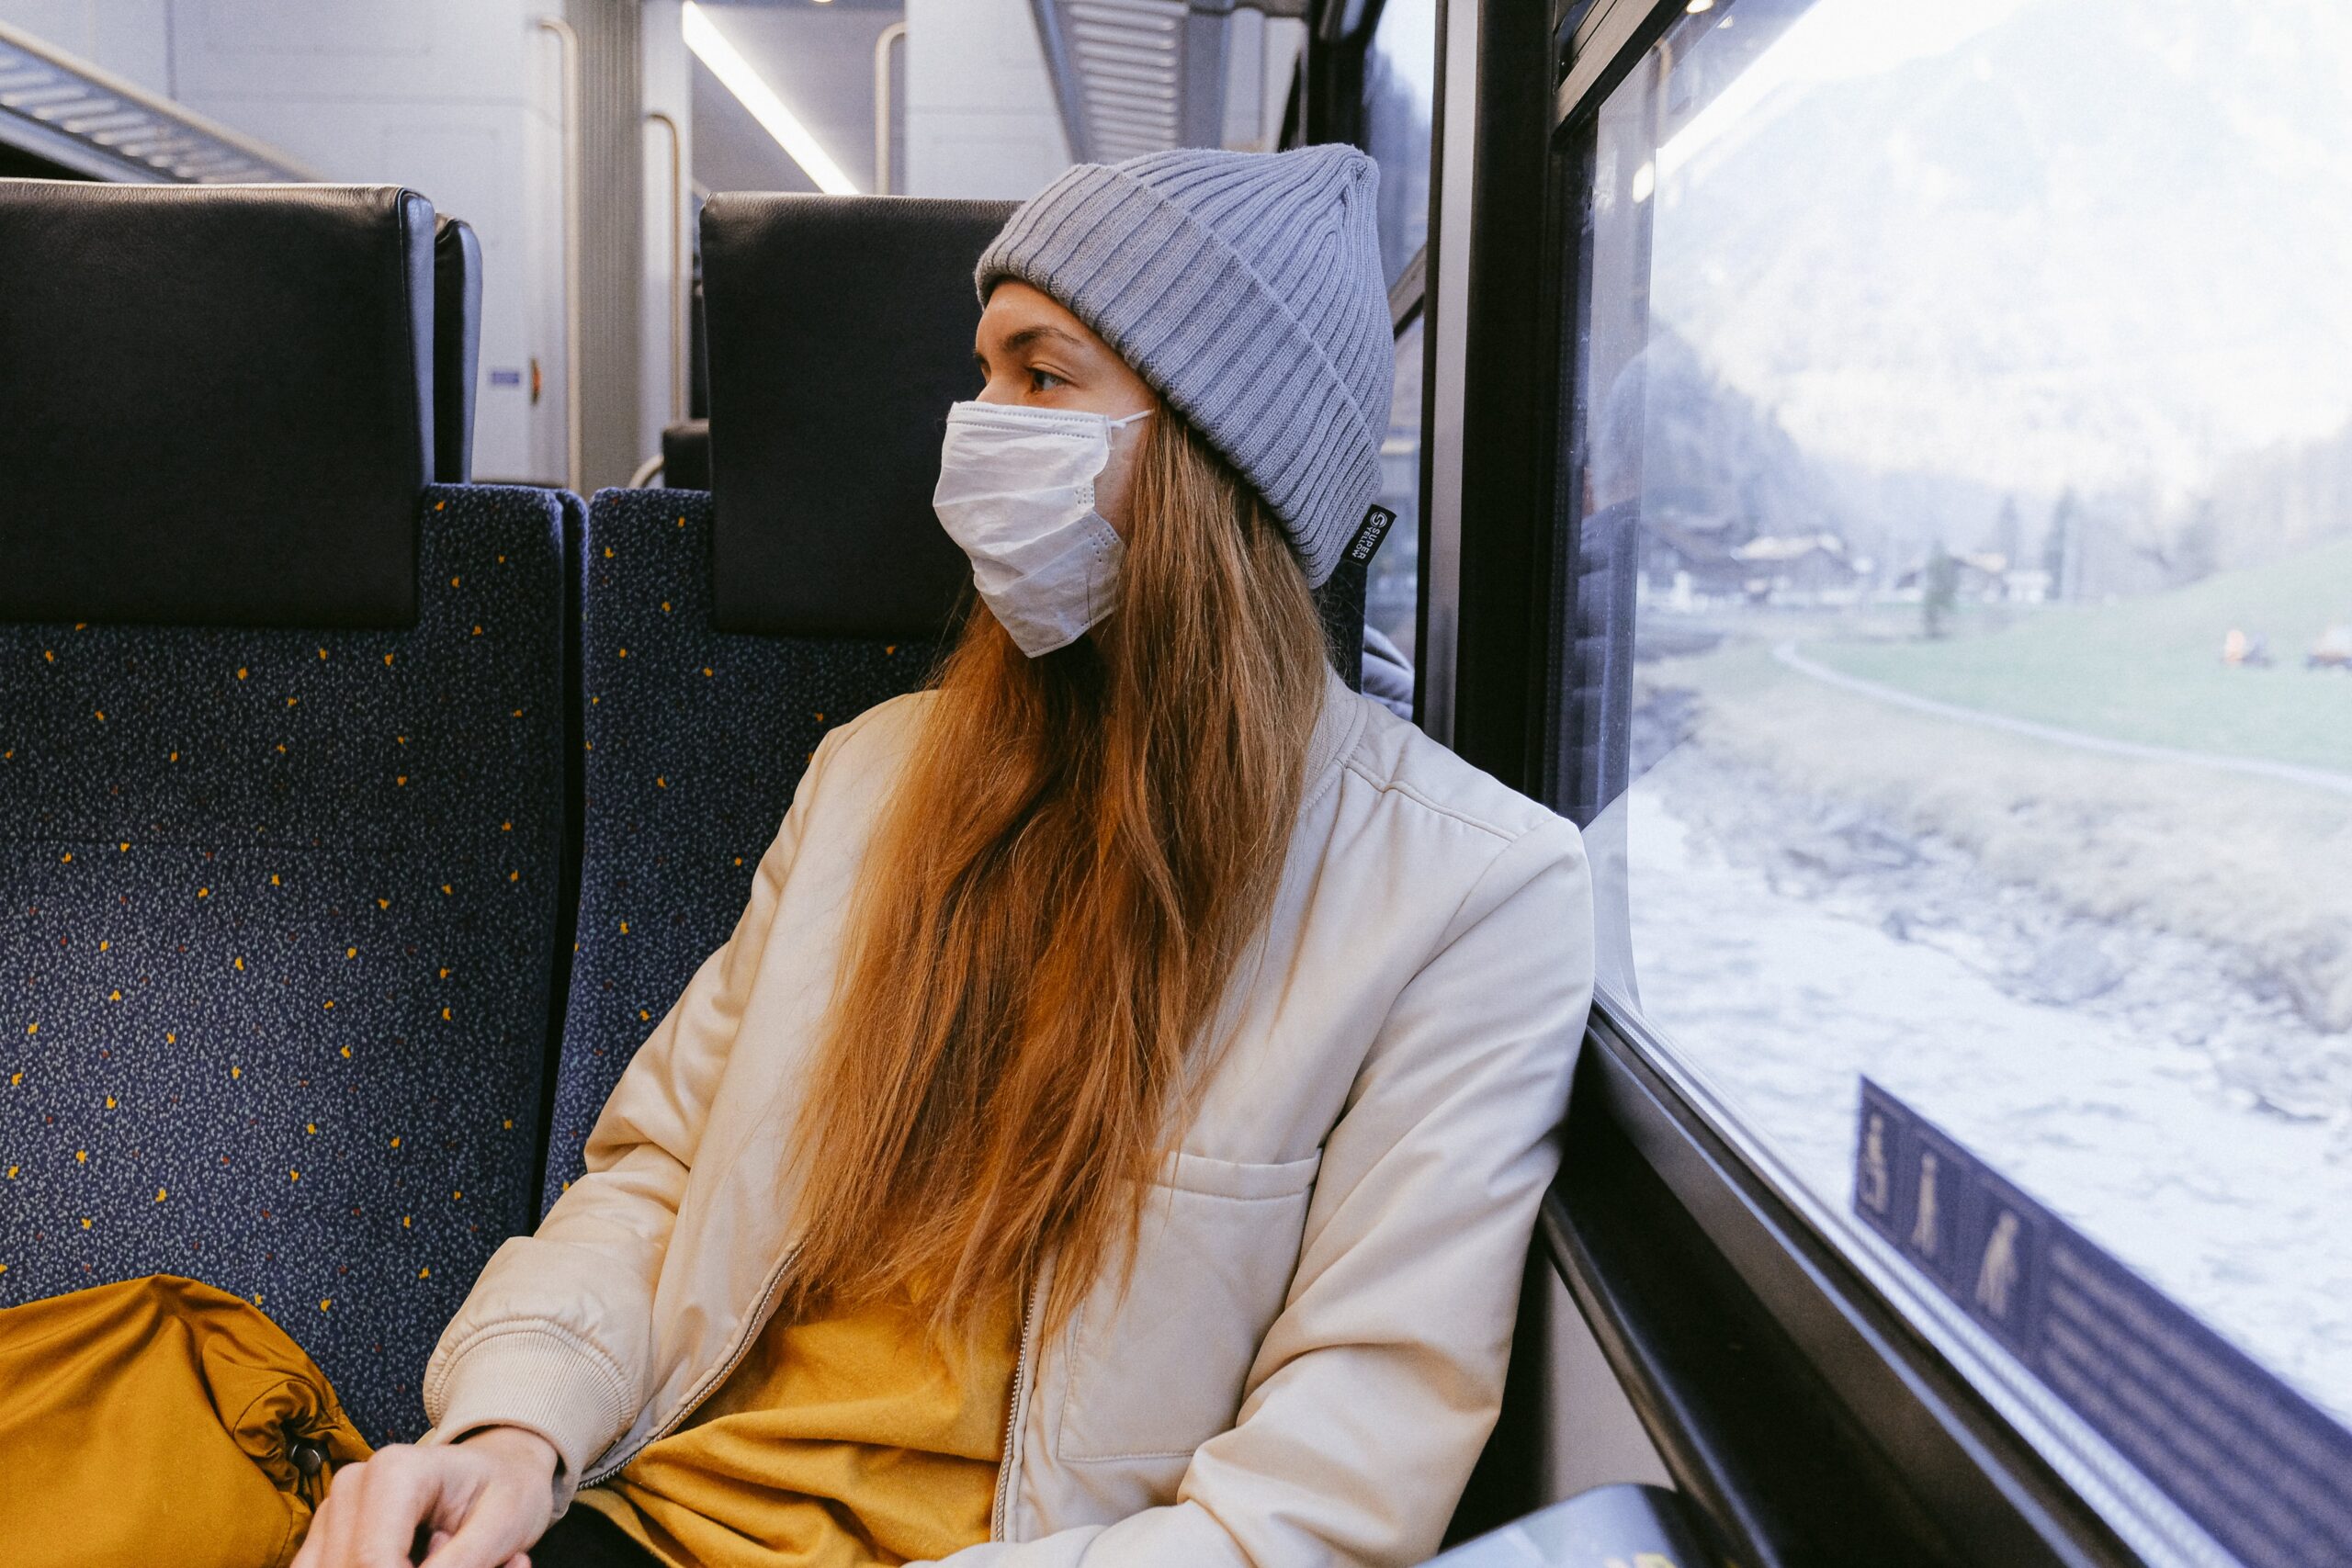 Girl sitting on train with a face mask and woolly hat.